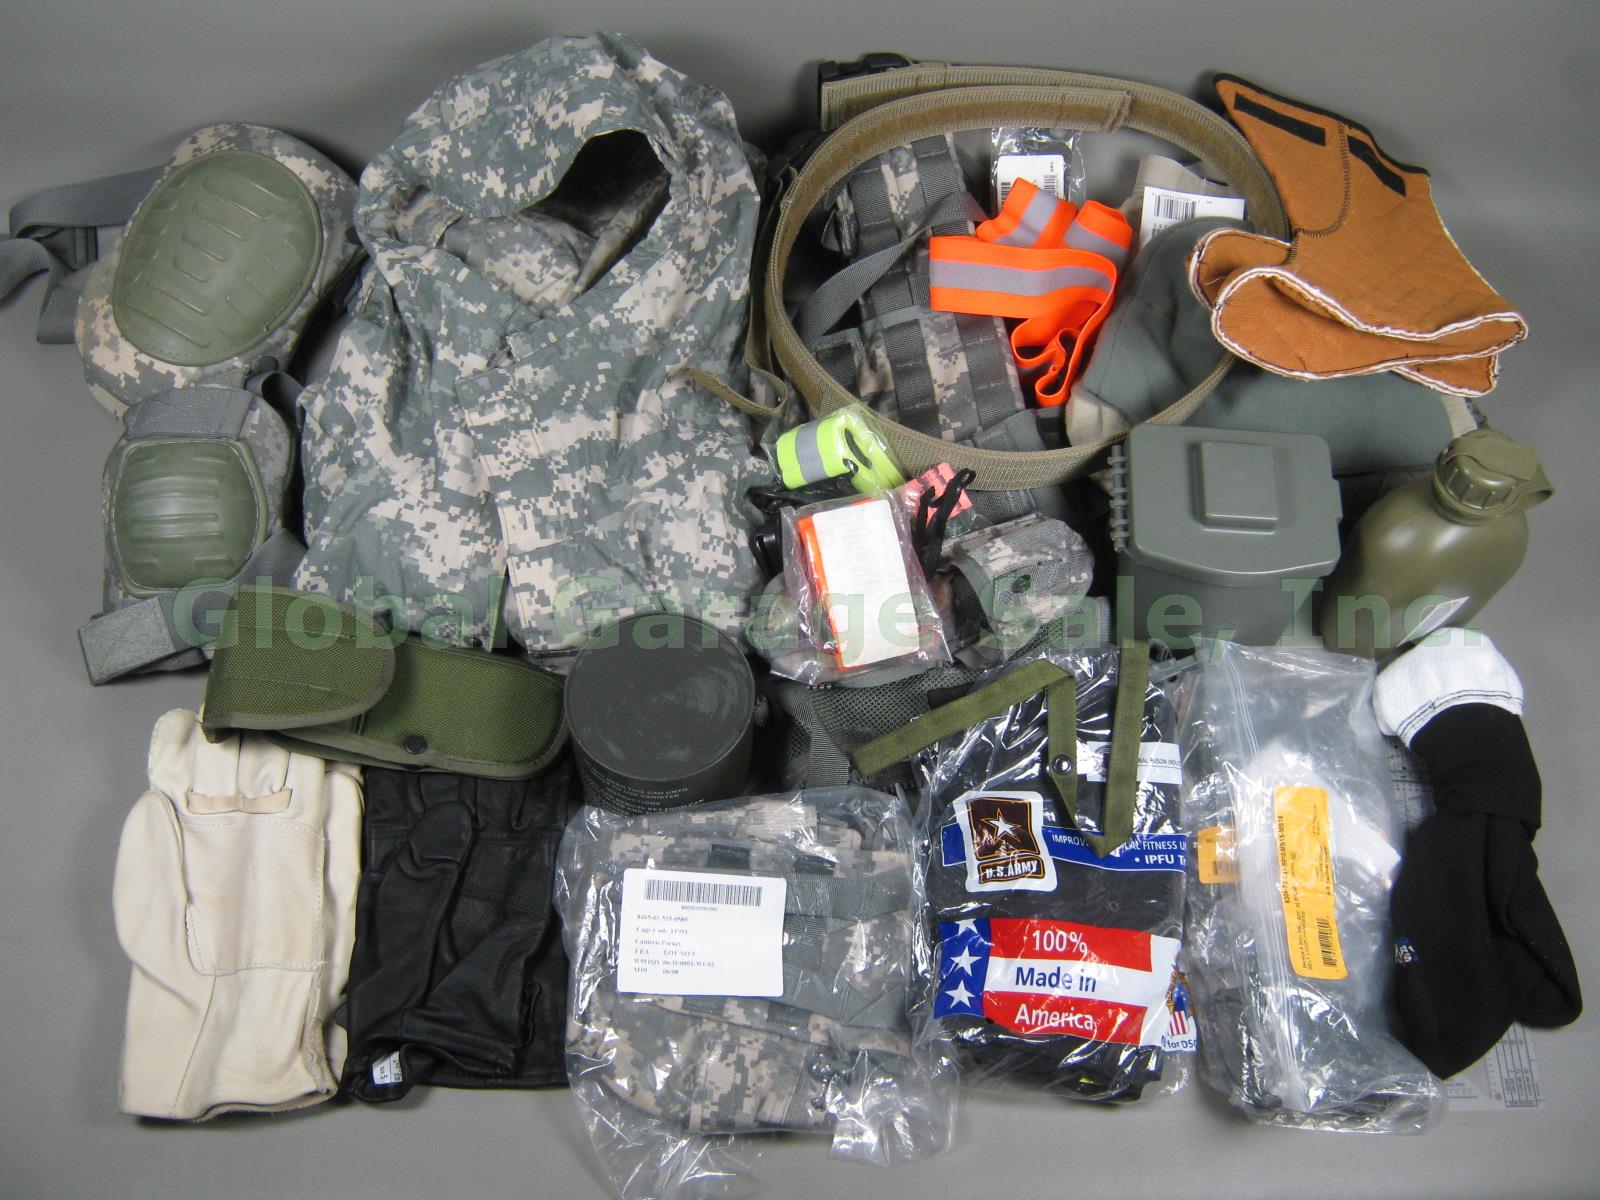 NEW Huge Military Gear Lot Rain Jacket Gloves Knee Pads Molle Load Vest Canteen